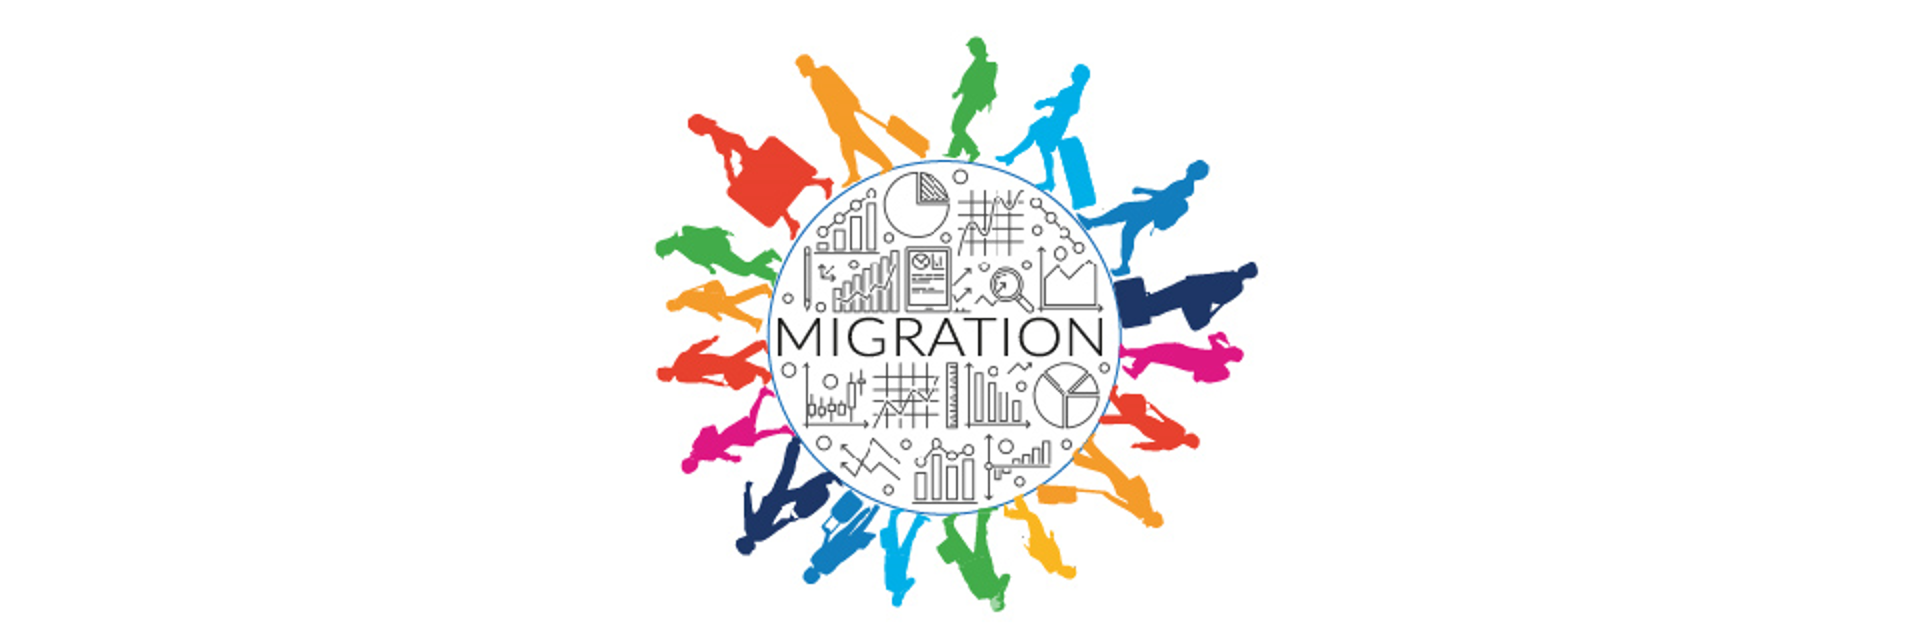 Morocco, Côte d’Ivoire and Senegal share experiences to strengthen their migration policies